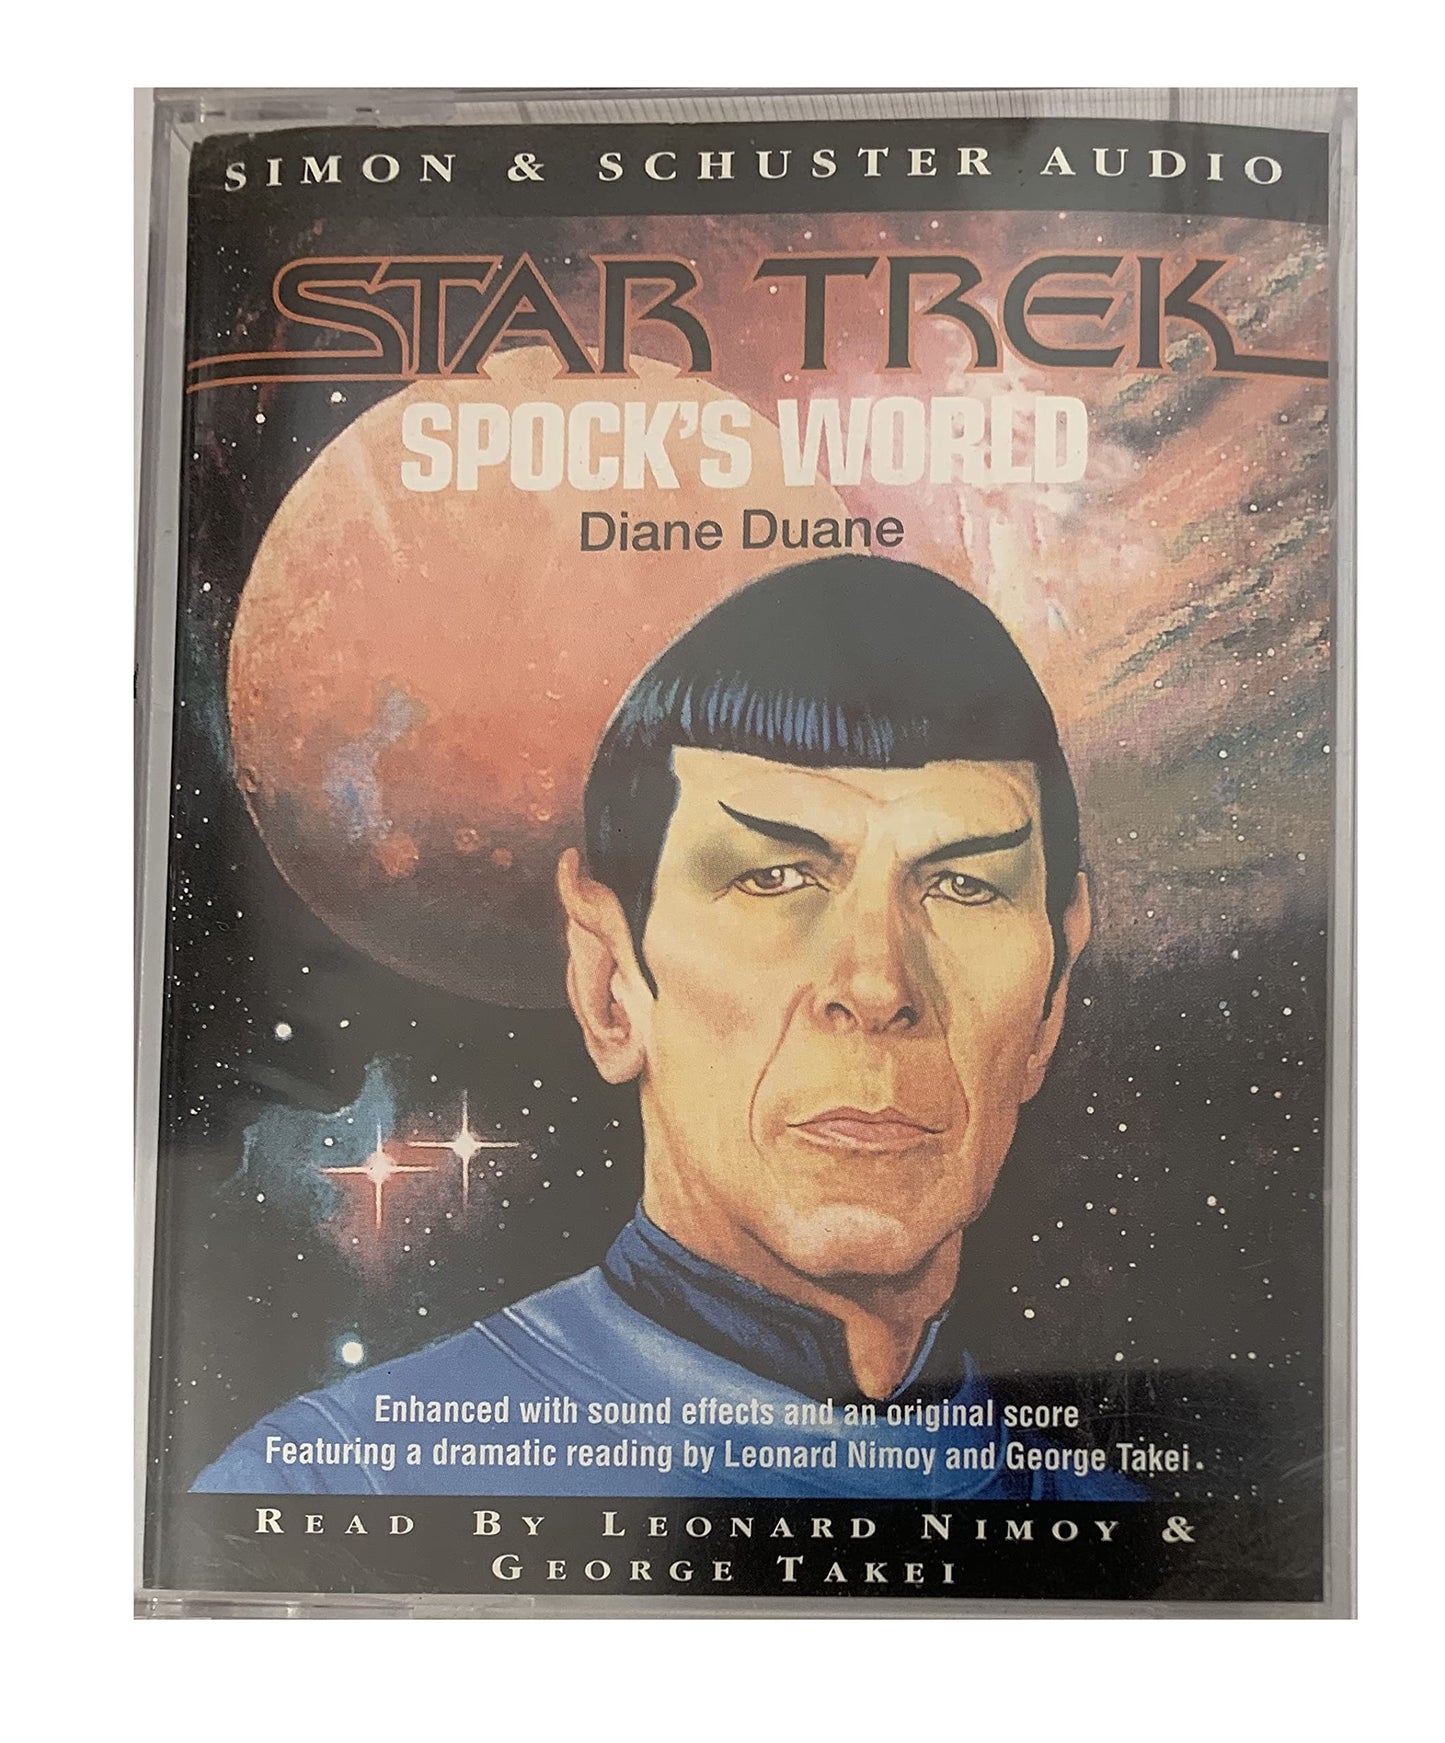 Vintage 1989 Star Trek : Spocks World - Simon & Schuster Double Audio Cassette Read By Leonard Nimoy and George Takei - Shop Stock Room Find